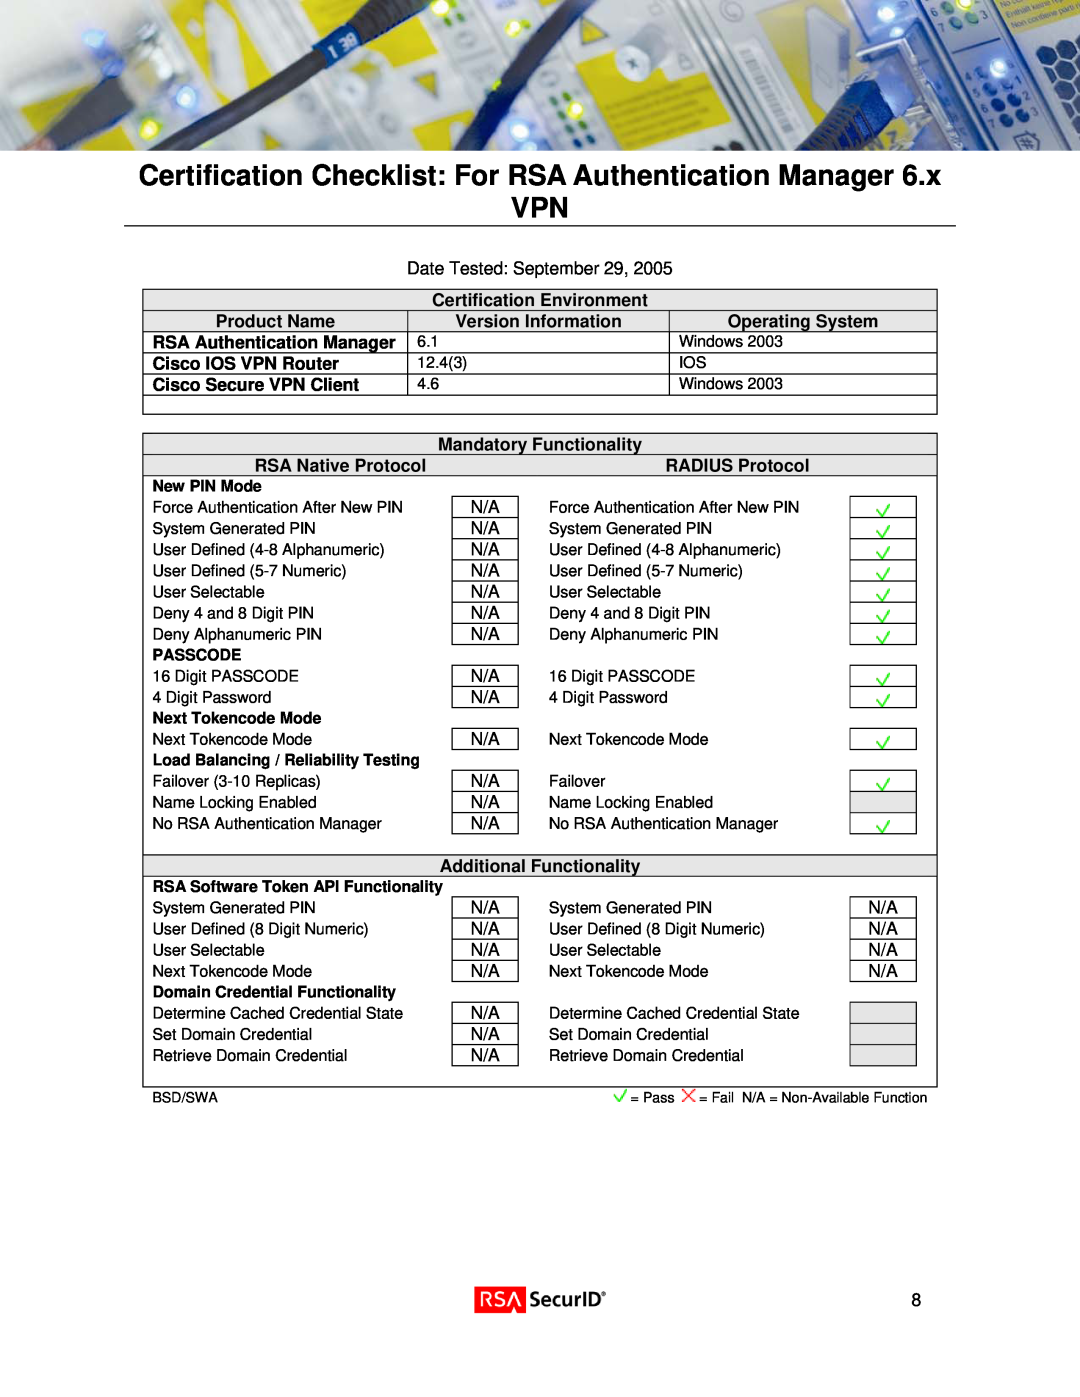 Cisco Systems IOS Router manual Certification Checklist For RSA Authentication Manager VPN 